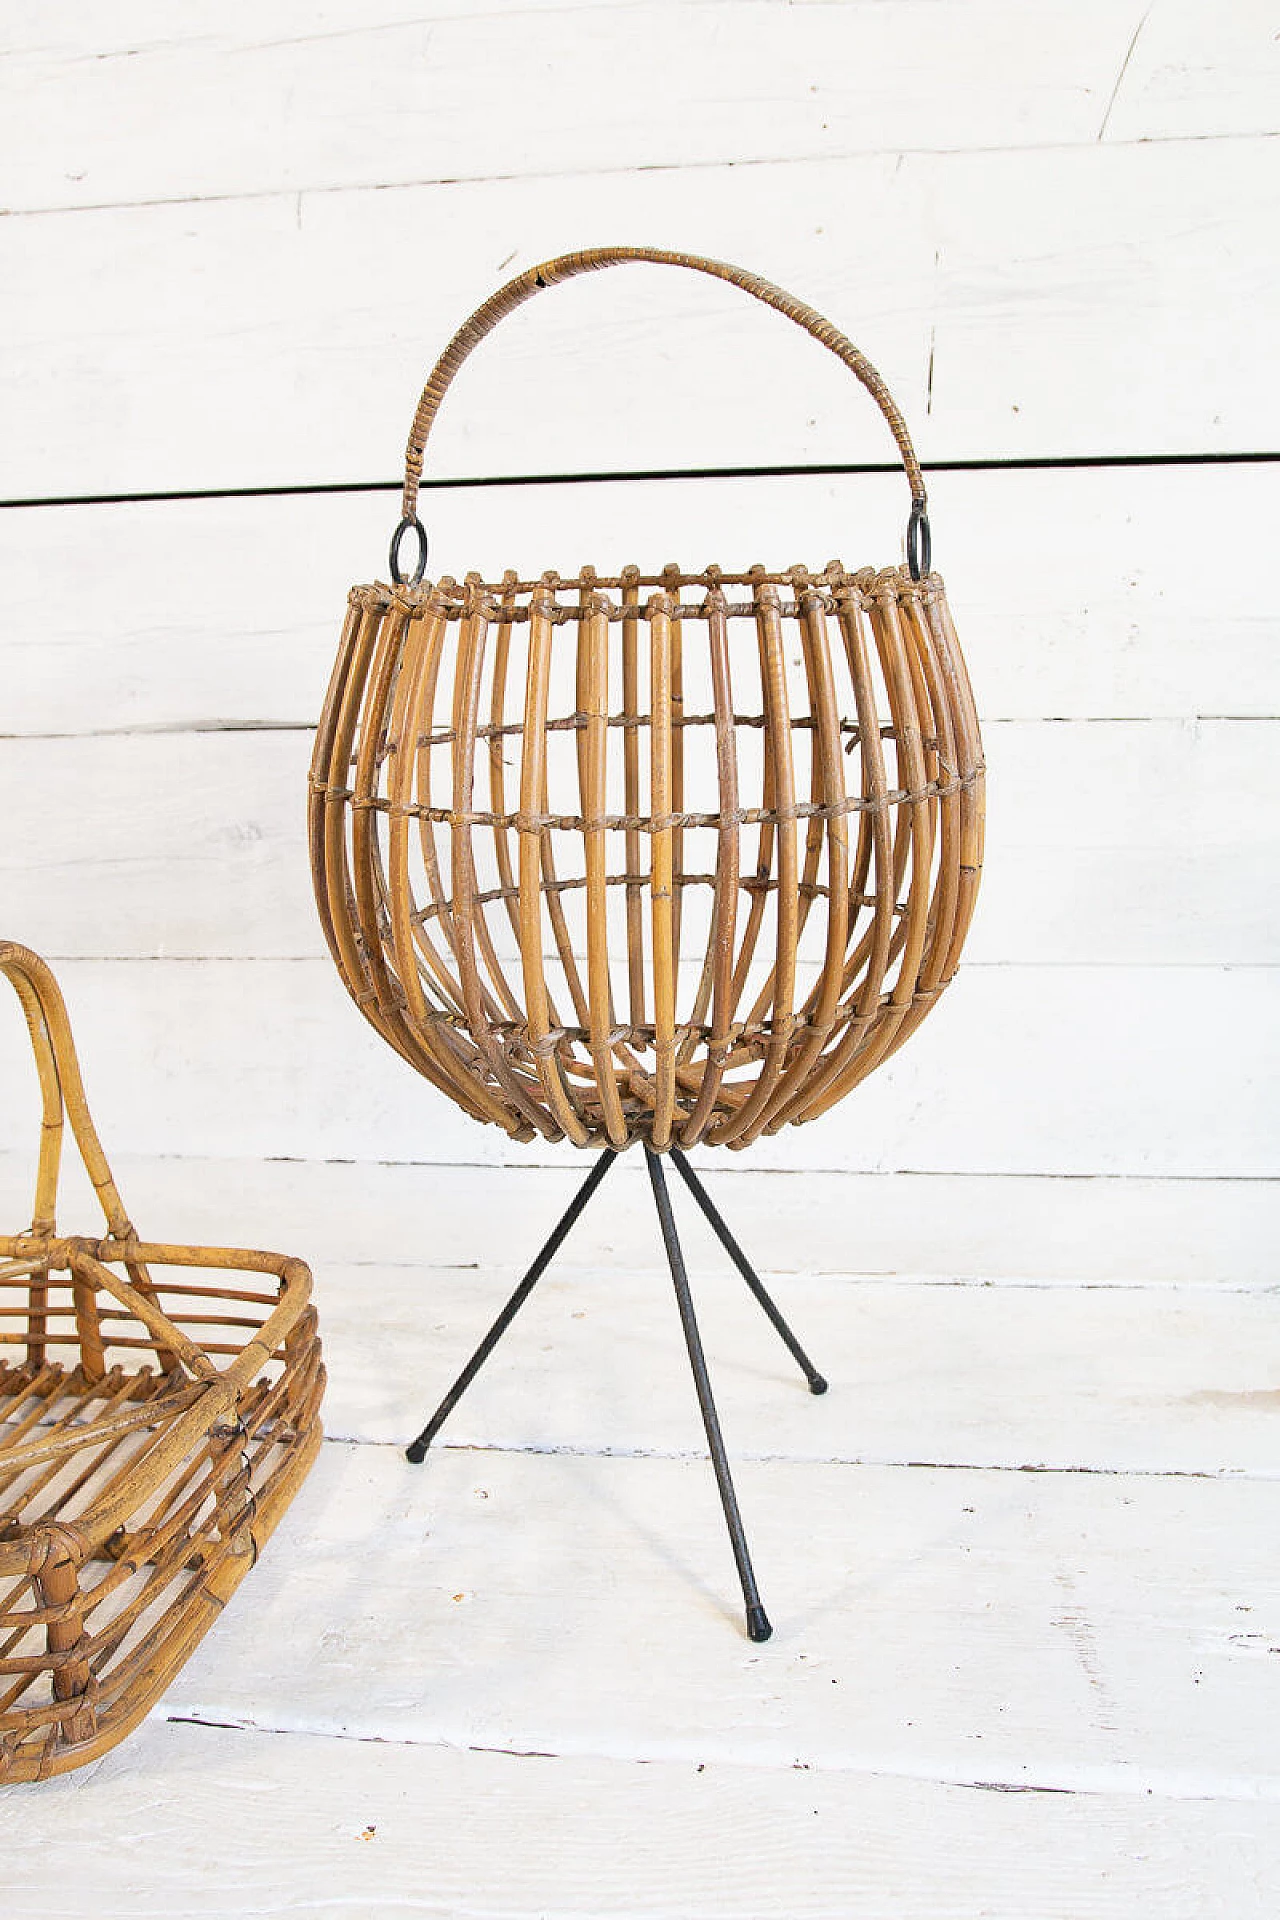 Basket sewn in wicker with feet, 50s 1283652